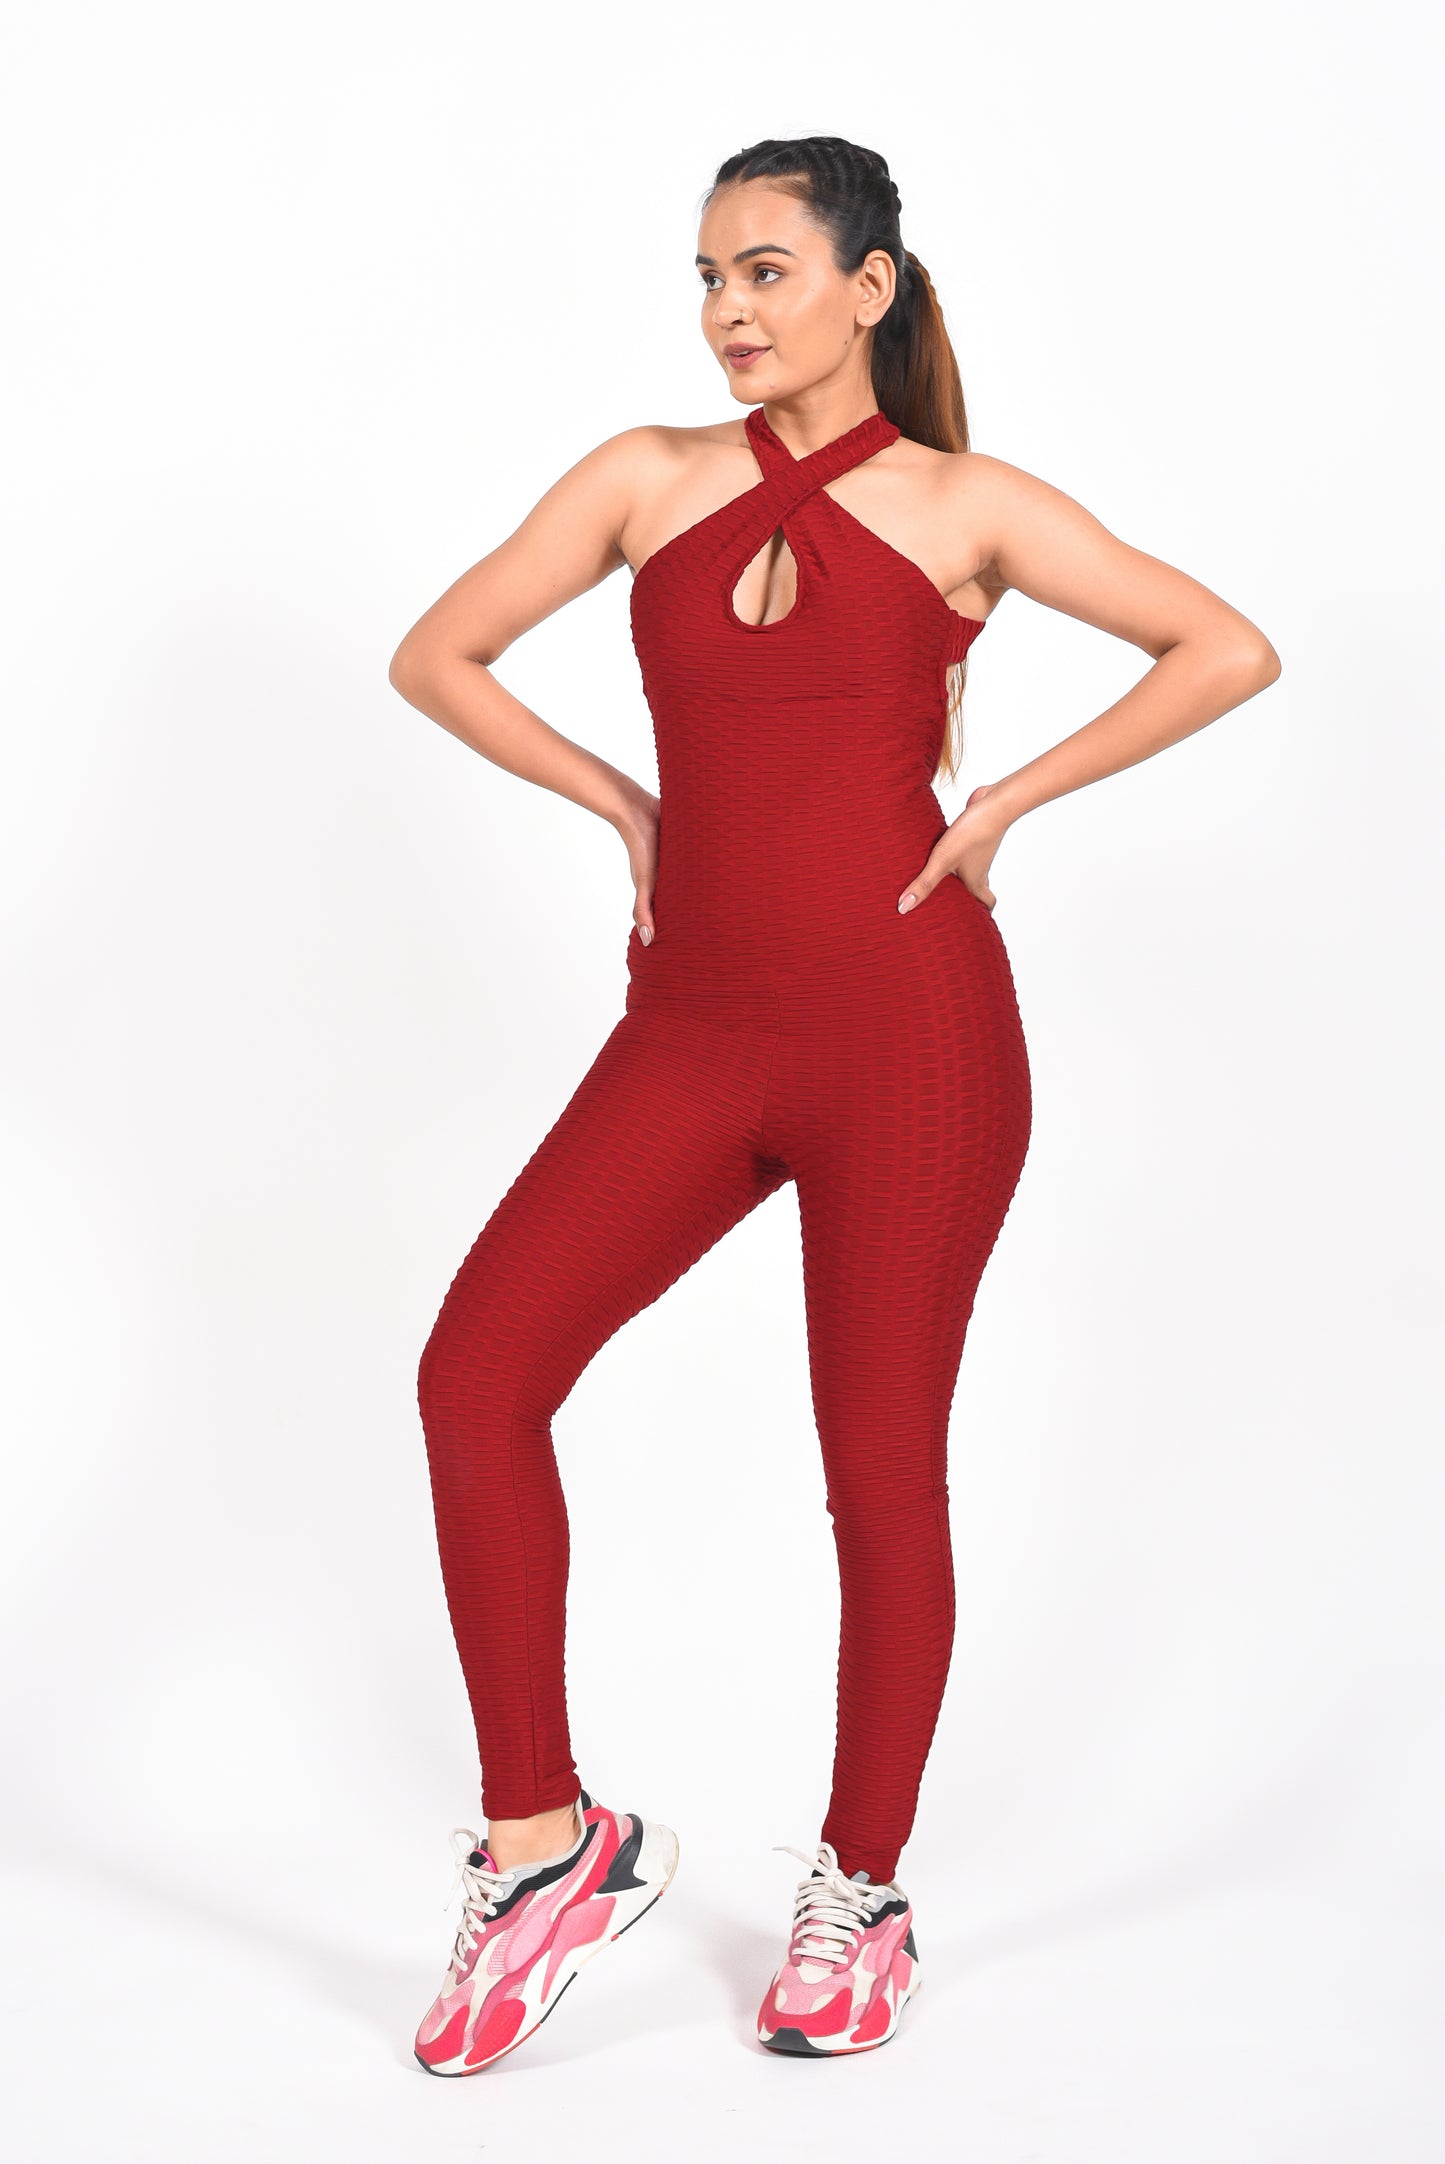 GYMSQUAD® ANTI-CELLULITE AND PUSH UP JUMPSUIT - P1697-WINE